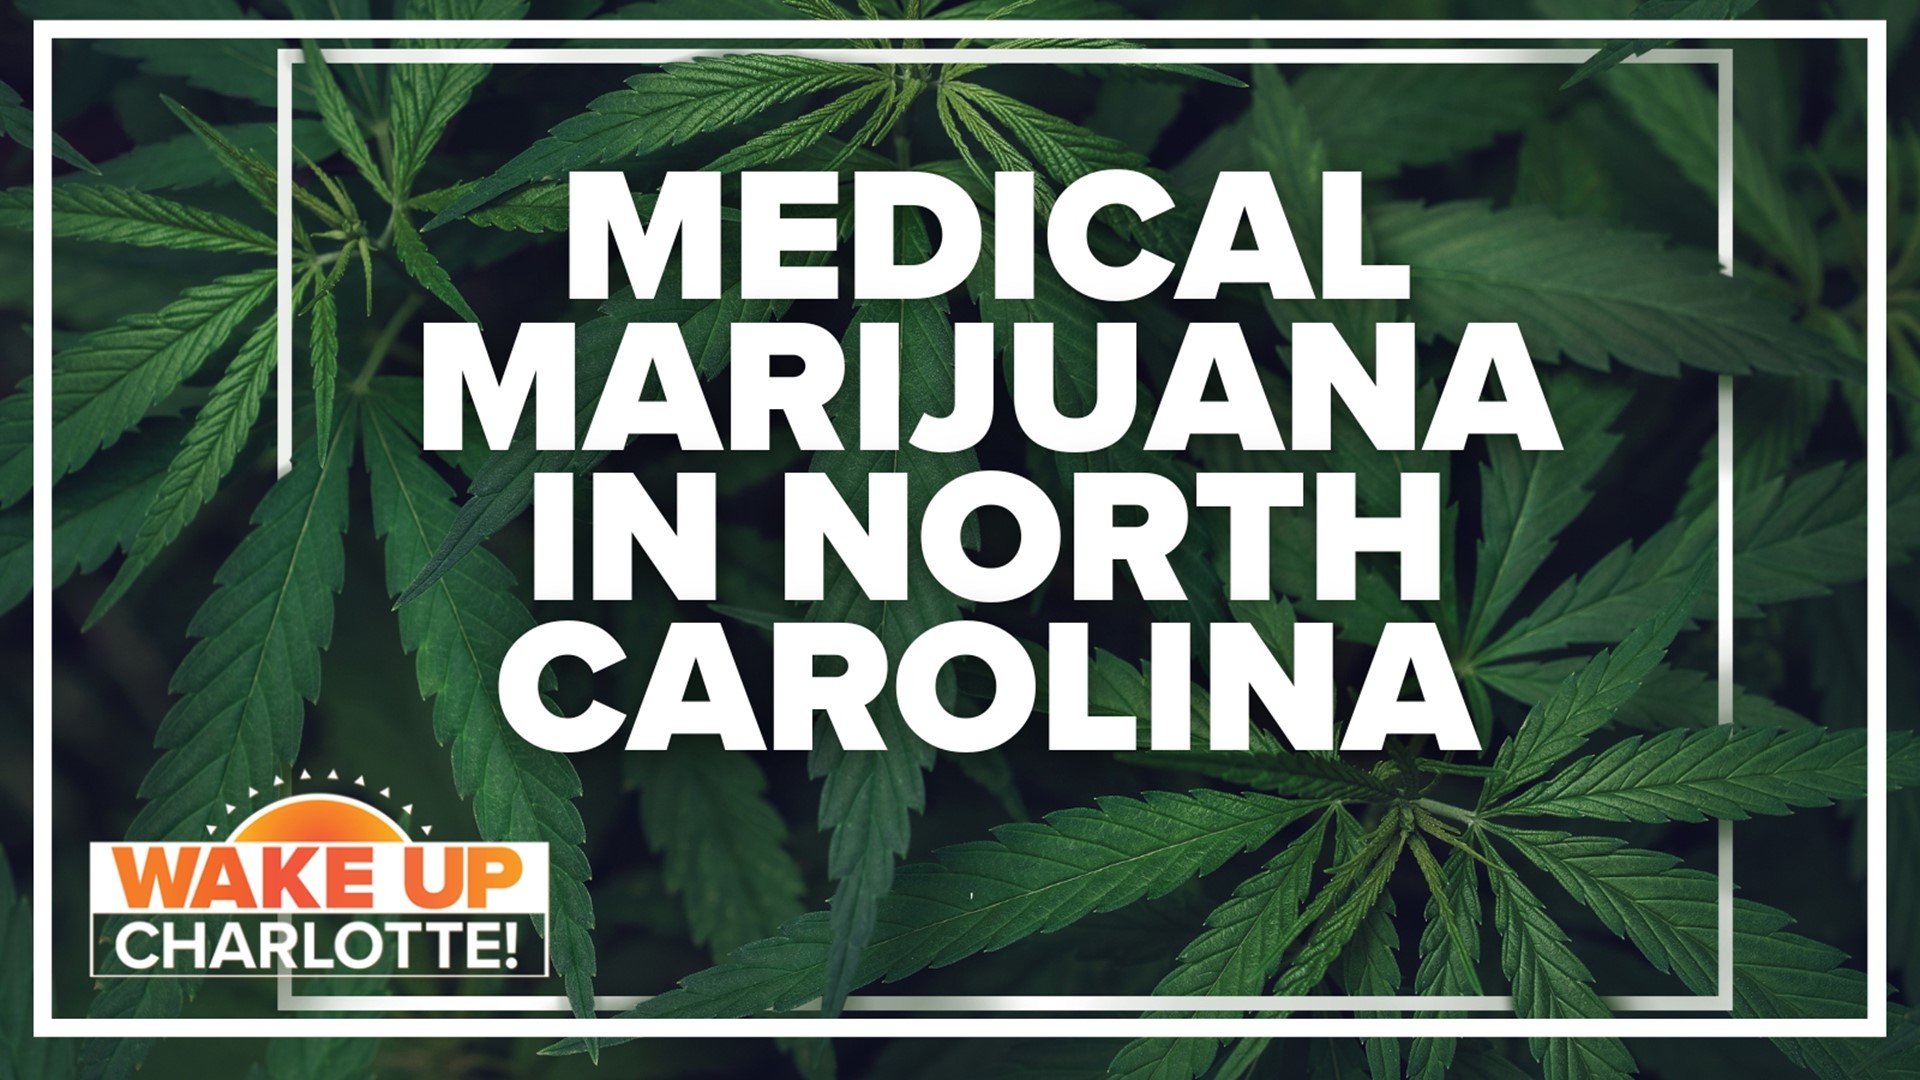 Polls show medical marijuana is highly popular, but Republican politicians have been hesitant to approve it until recently.